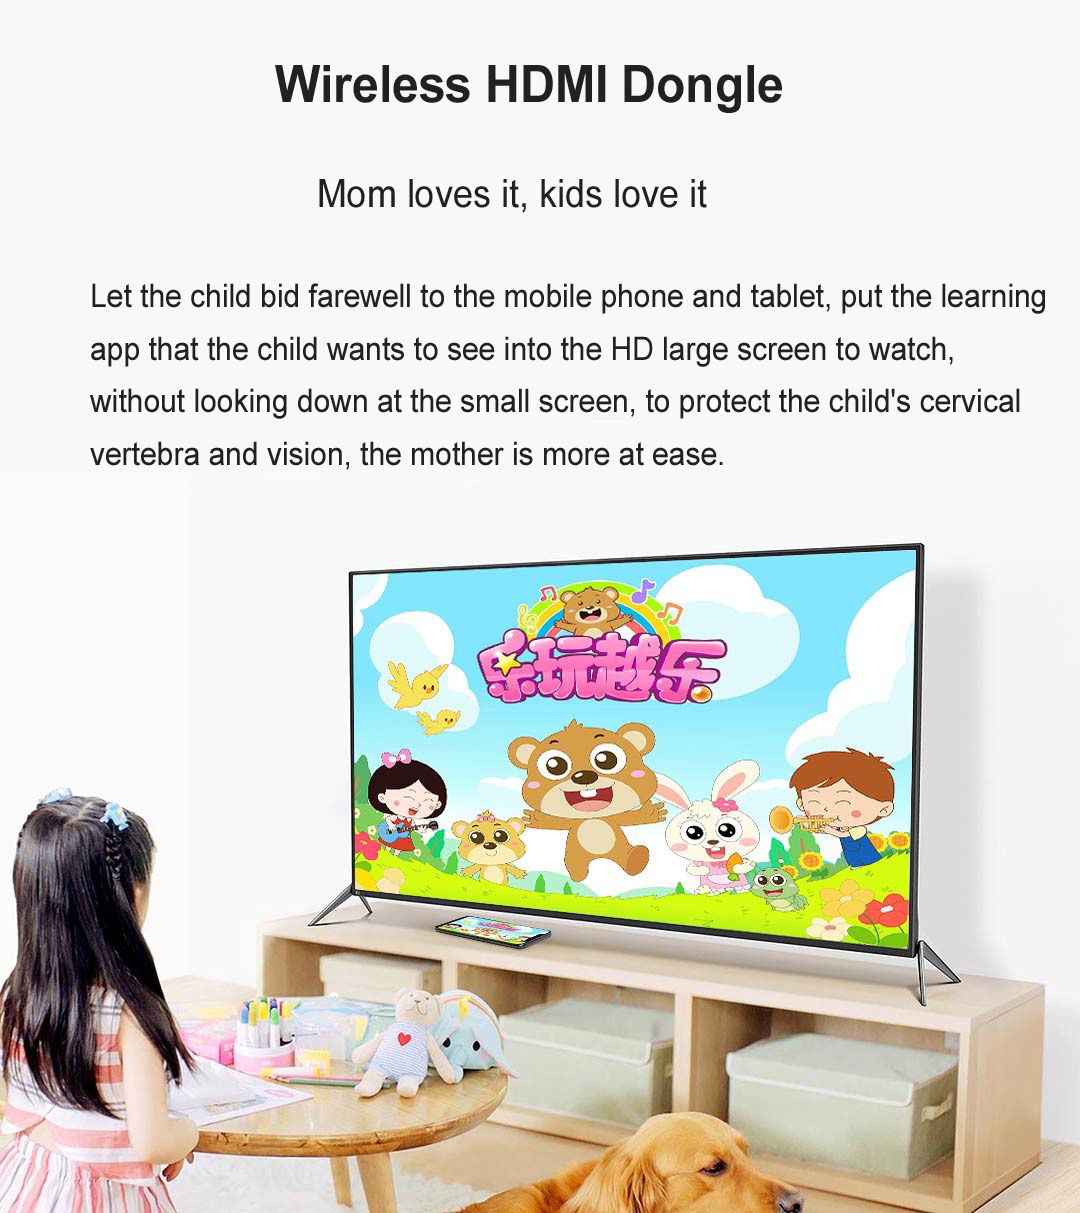 HAGiBiS-24G5G-Display-Dongle-HDMI-TV-Dongle-for-AndroidIOS-Netflix-Youtube-Mirroring-Wireless-High-D-1579922